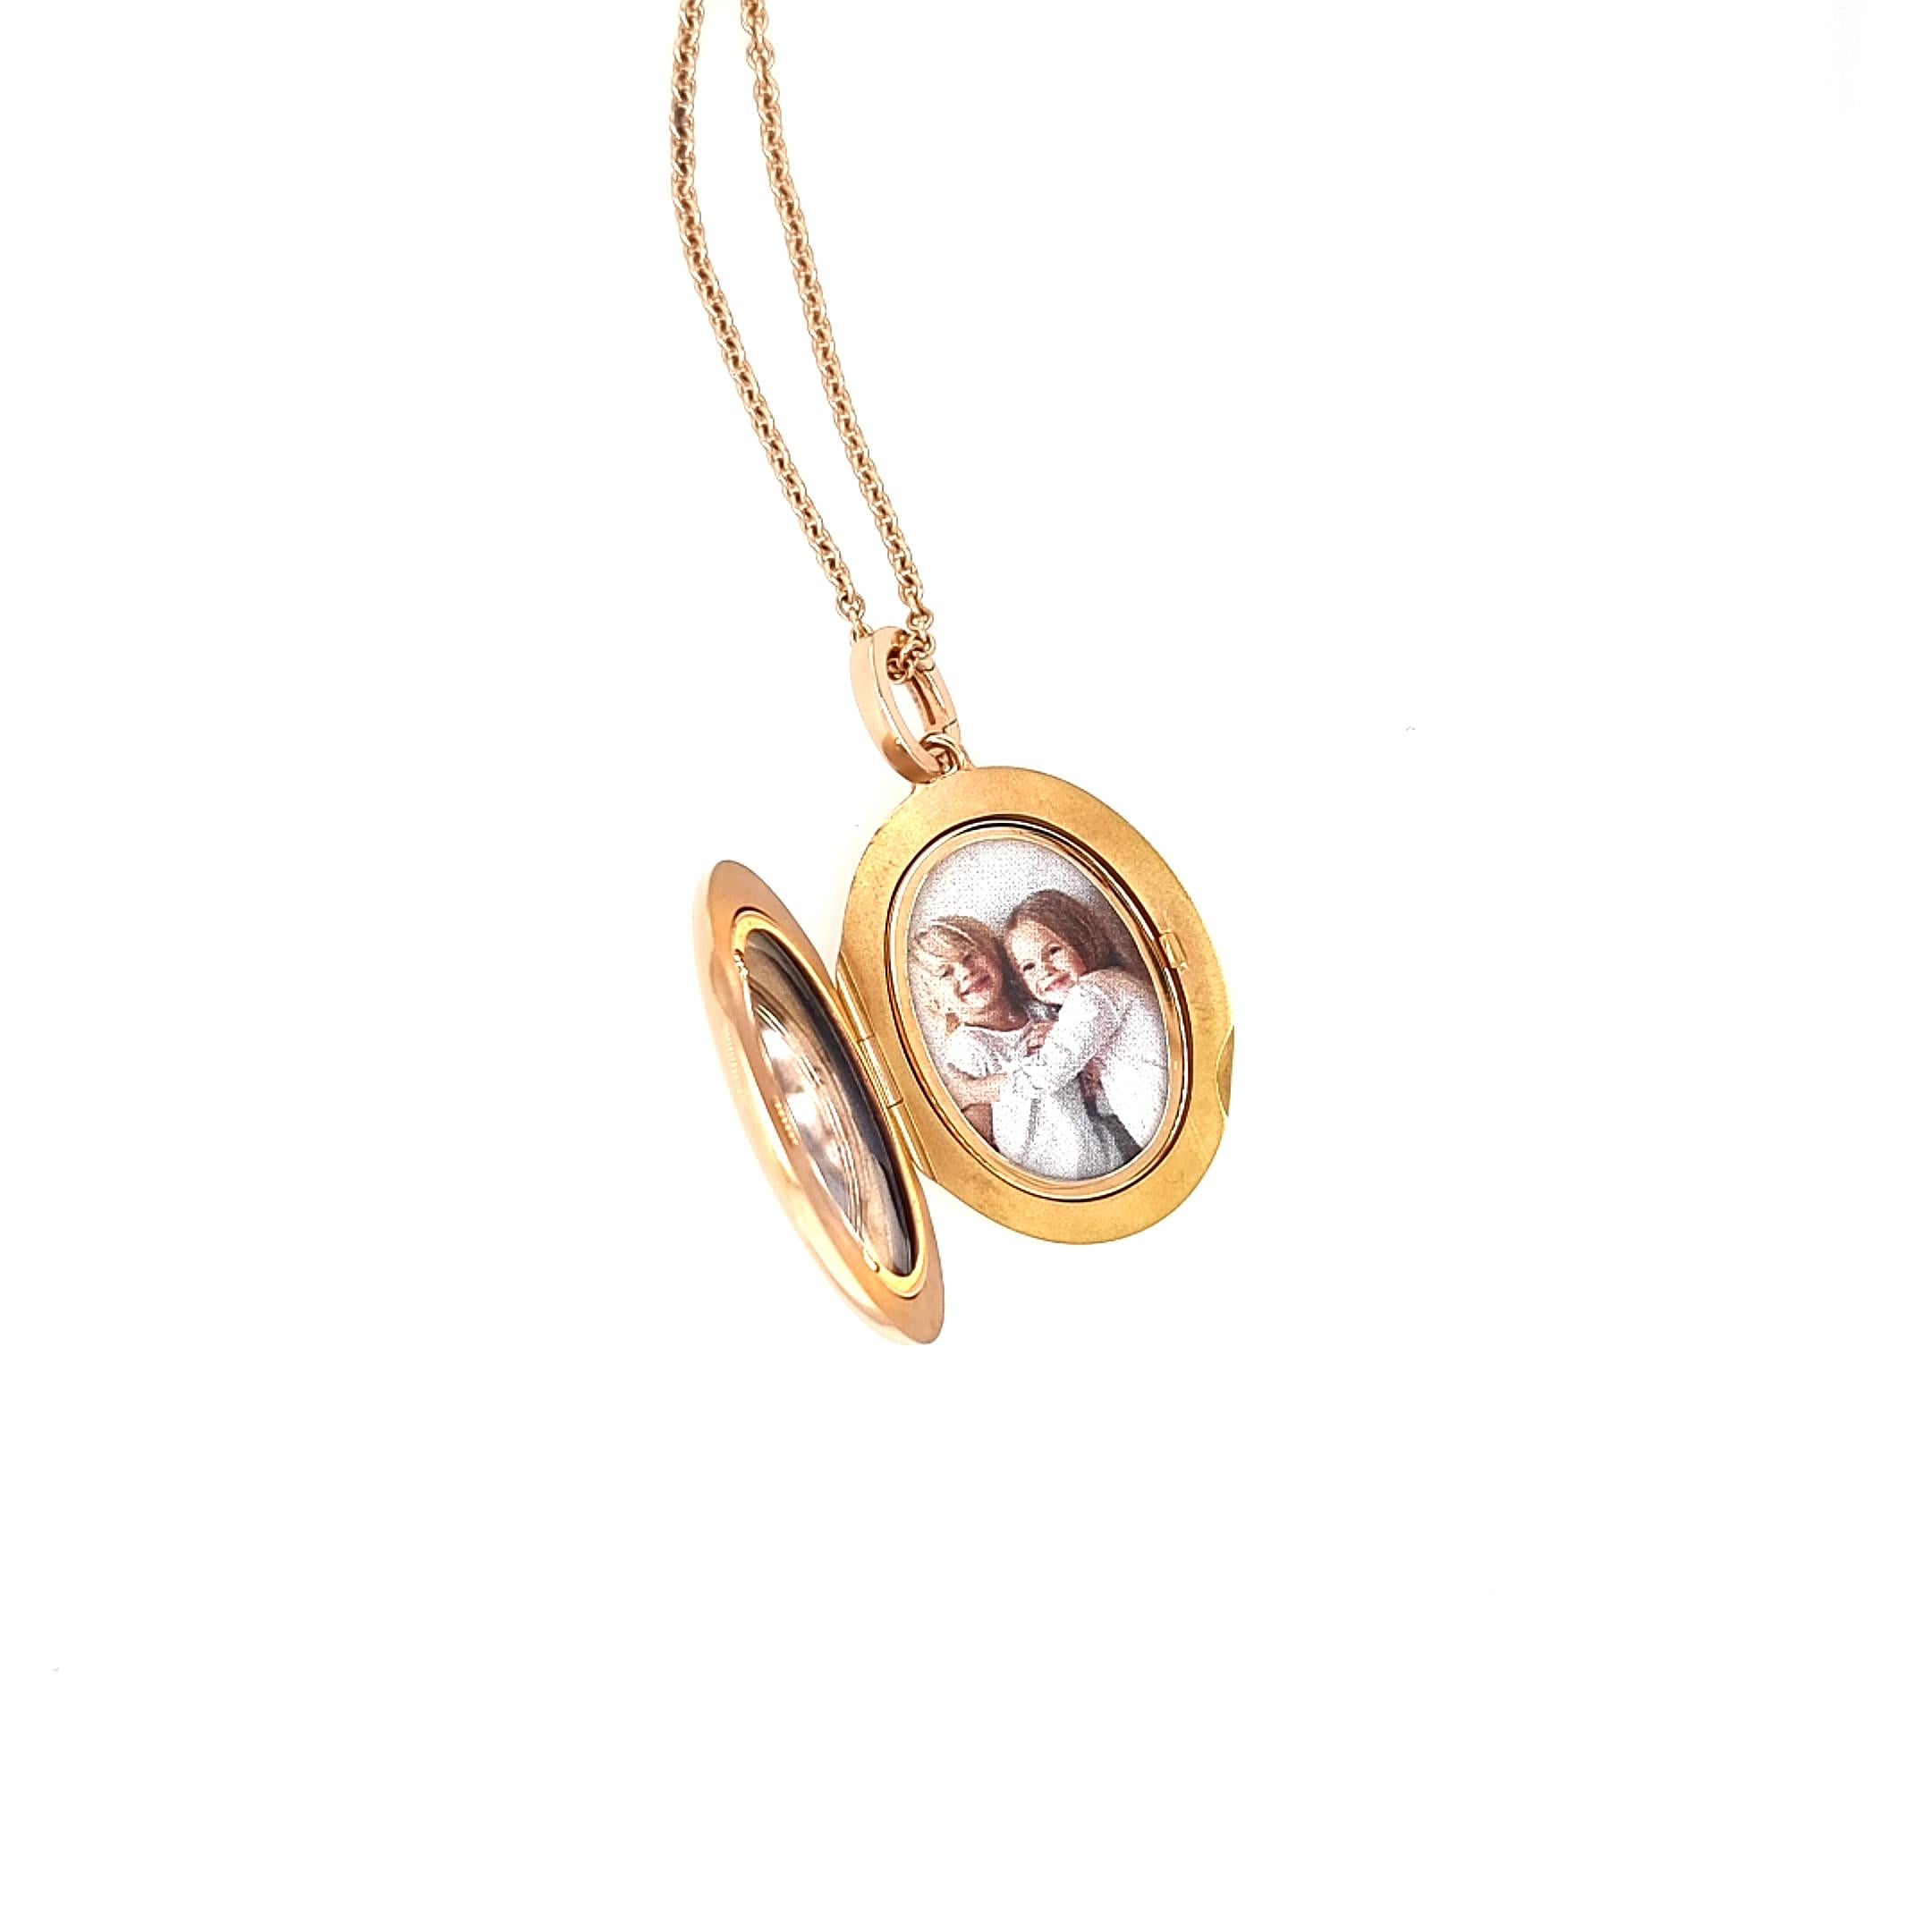 Customizable Oval Polished Pendant Locket - 18k Rose Gold - 23.0 mm x 32.0 mm For Sale 4